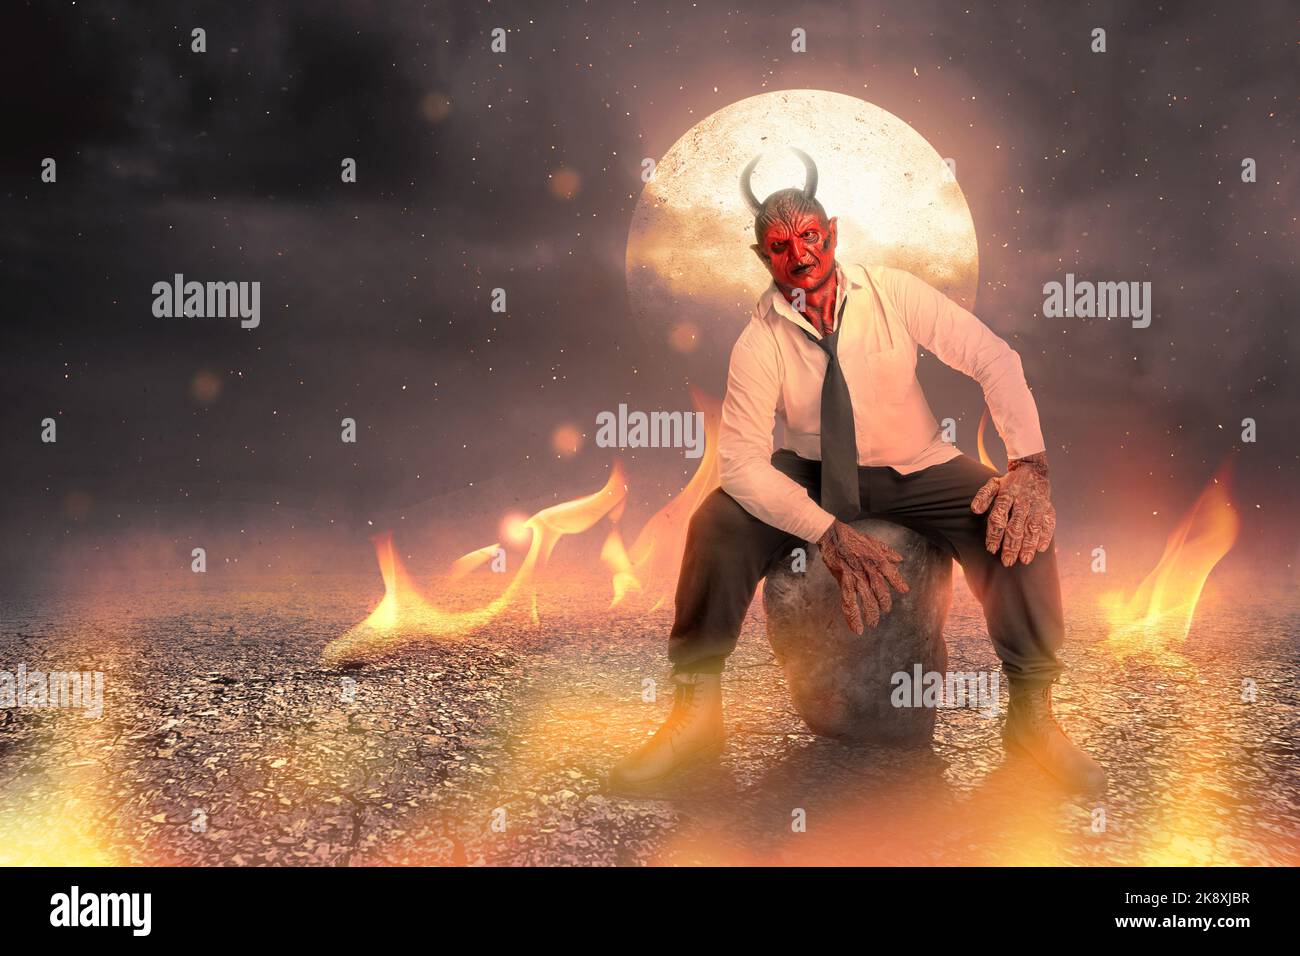 Devilman is sitting with a fire and full moon background. Halloween concept Stock Photo